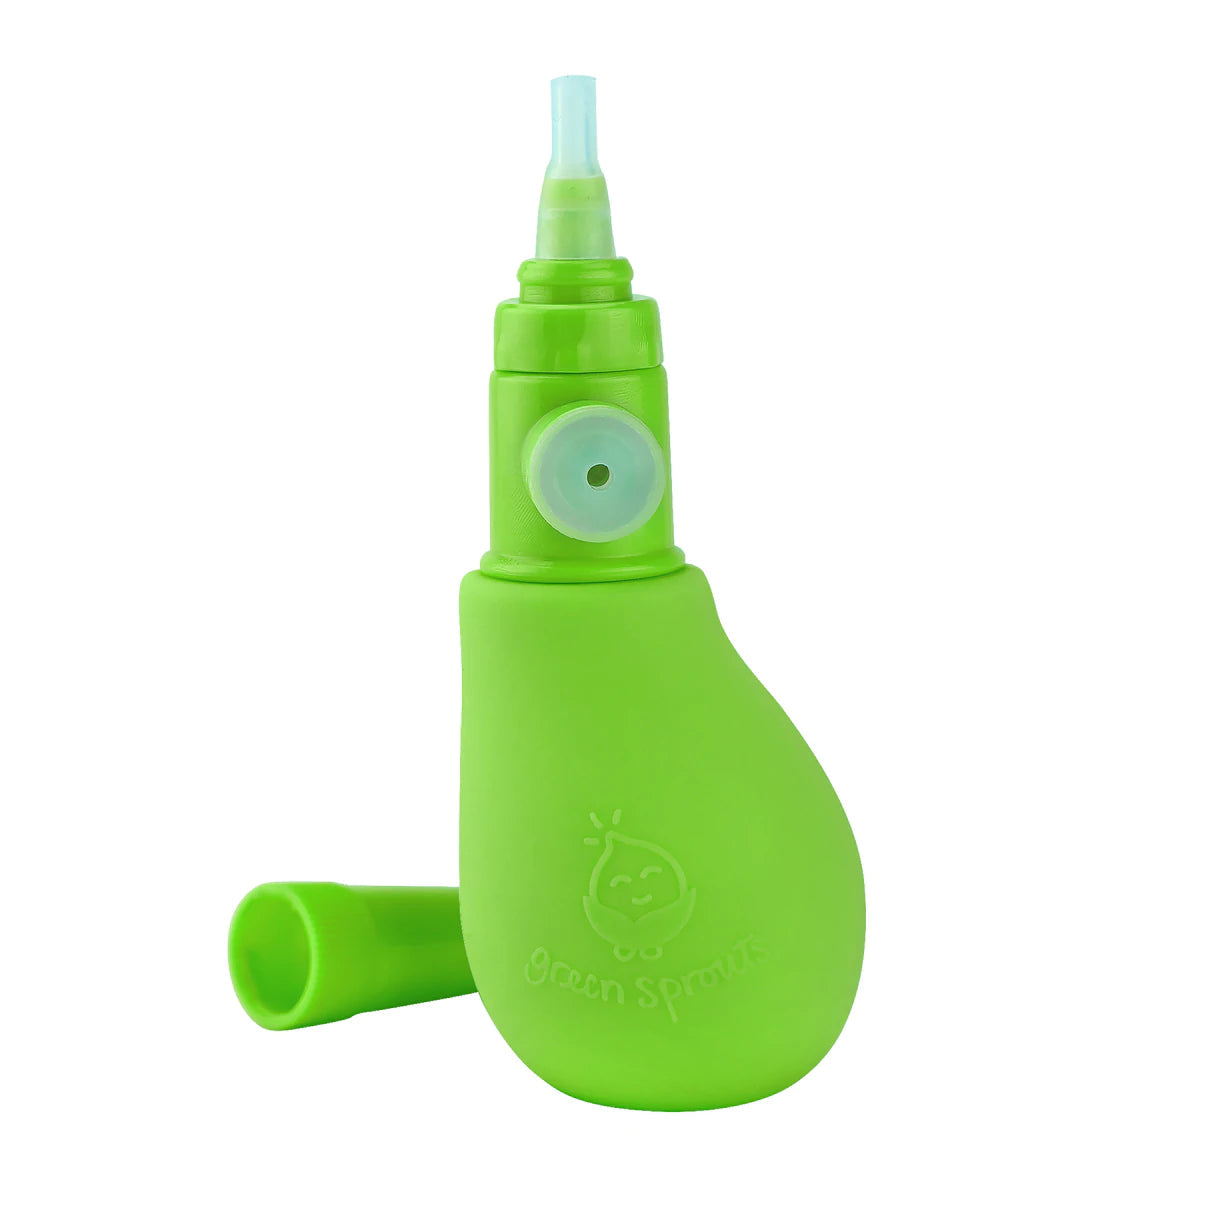 https://cdn.shopify.com/s/files/1/1300/6865/products/Green-Sprouts-Sprout-Warer-Nasal-Aspirator-made-from-Plants-and-Silicone-Green-Sprouts.webp?v=1652752519&width=1216